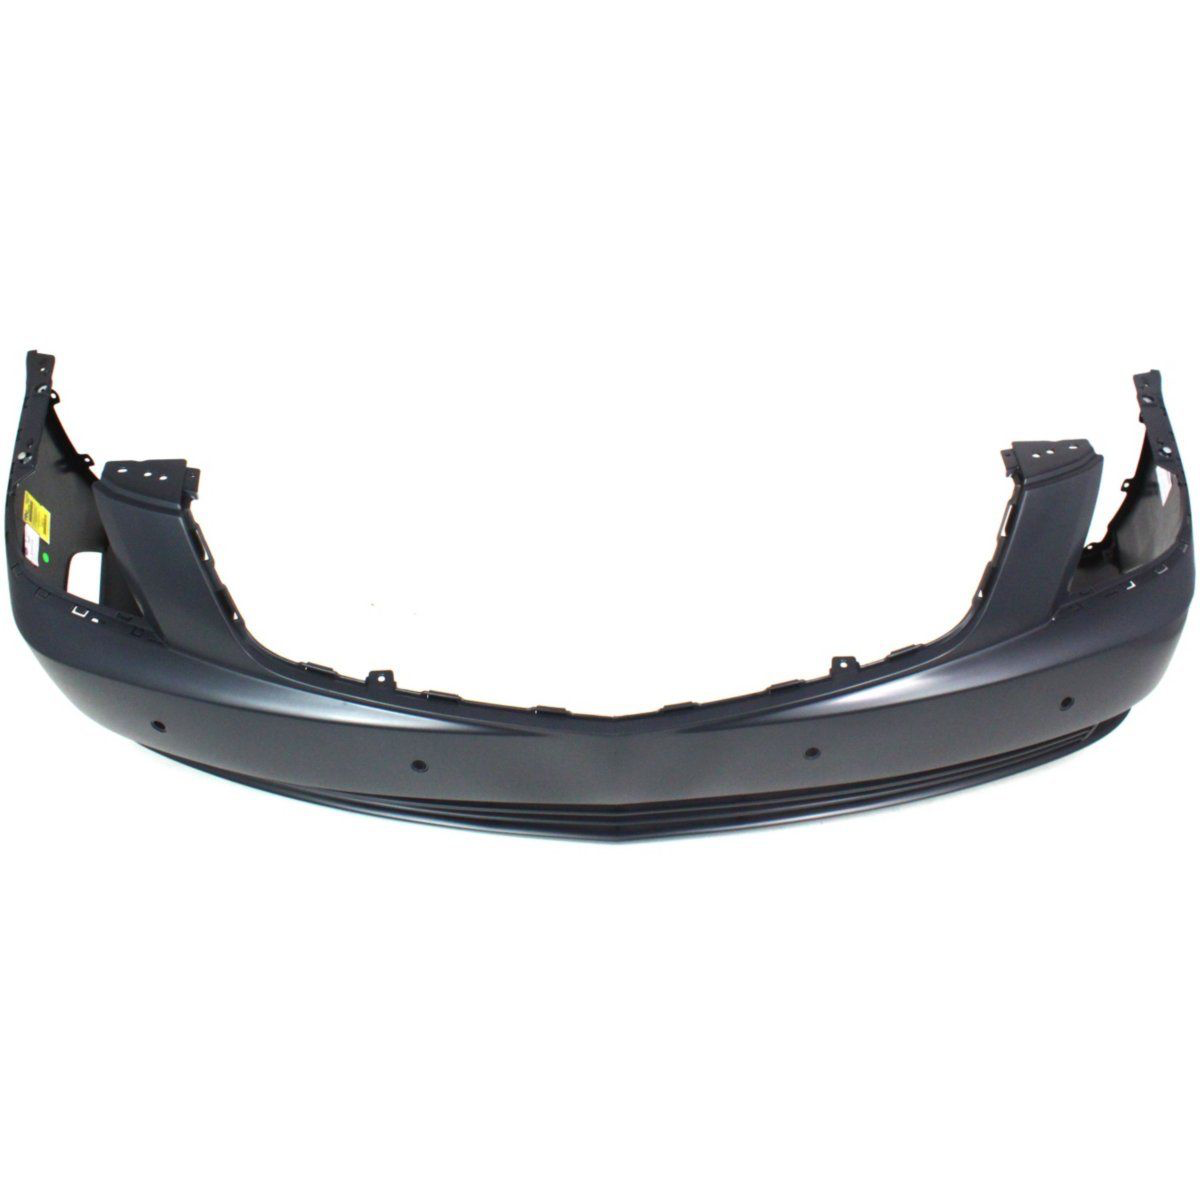 2006-2011 CADILLAC DTS Front Bumper Cover w/object sensors Painted to Match